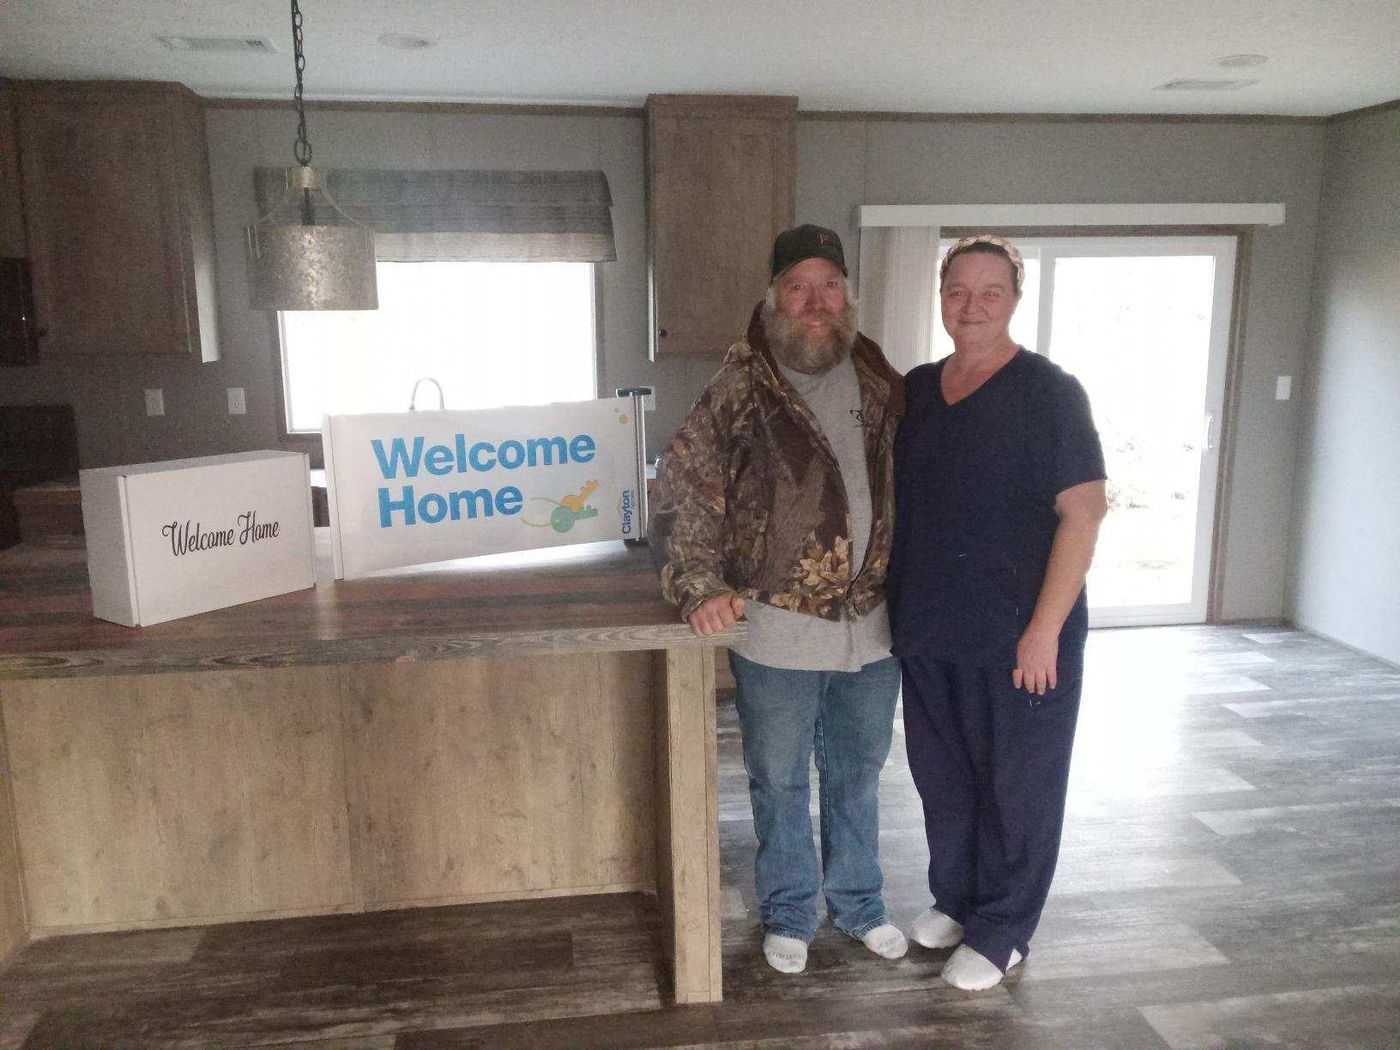 STEVEN S. welcome home image